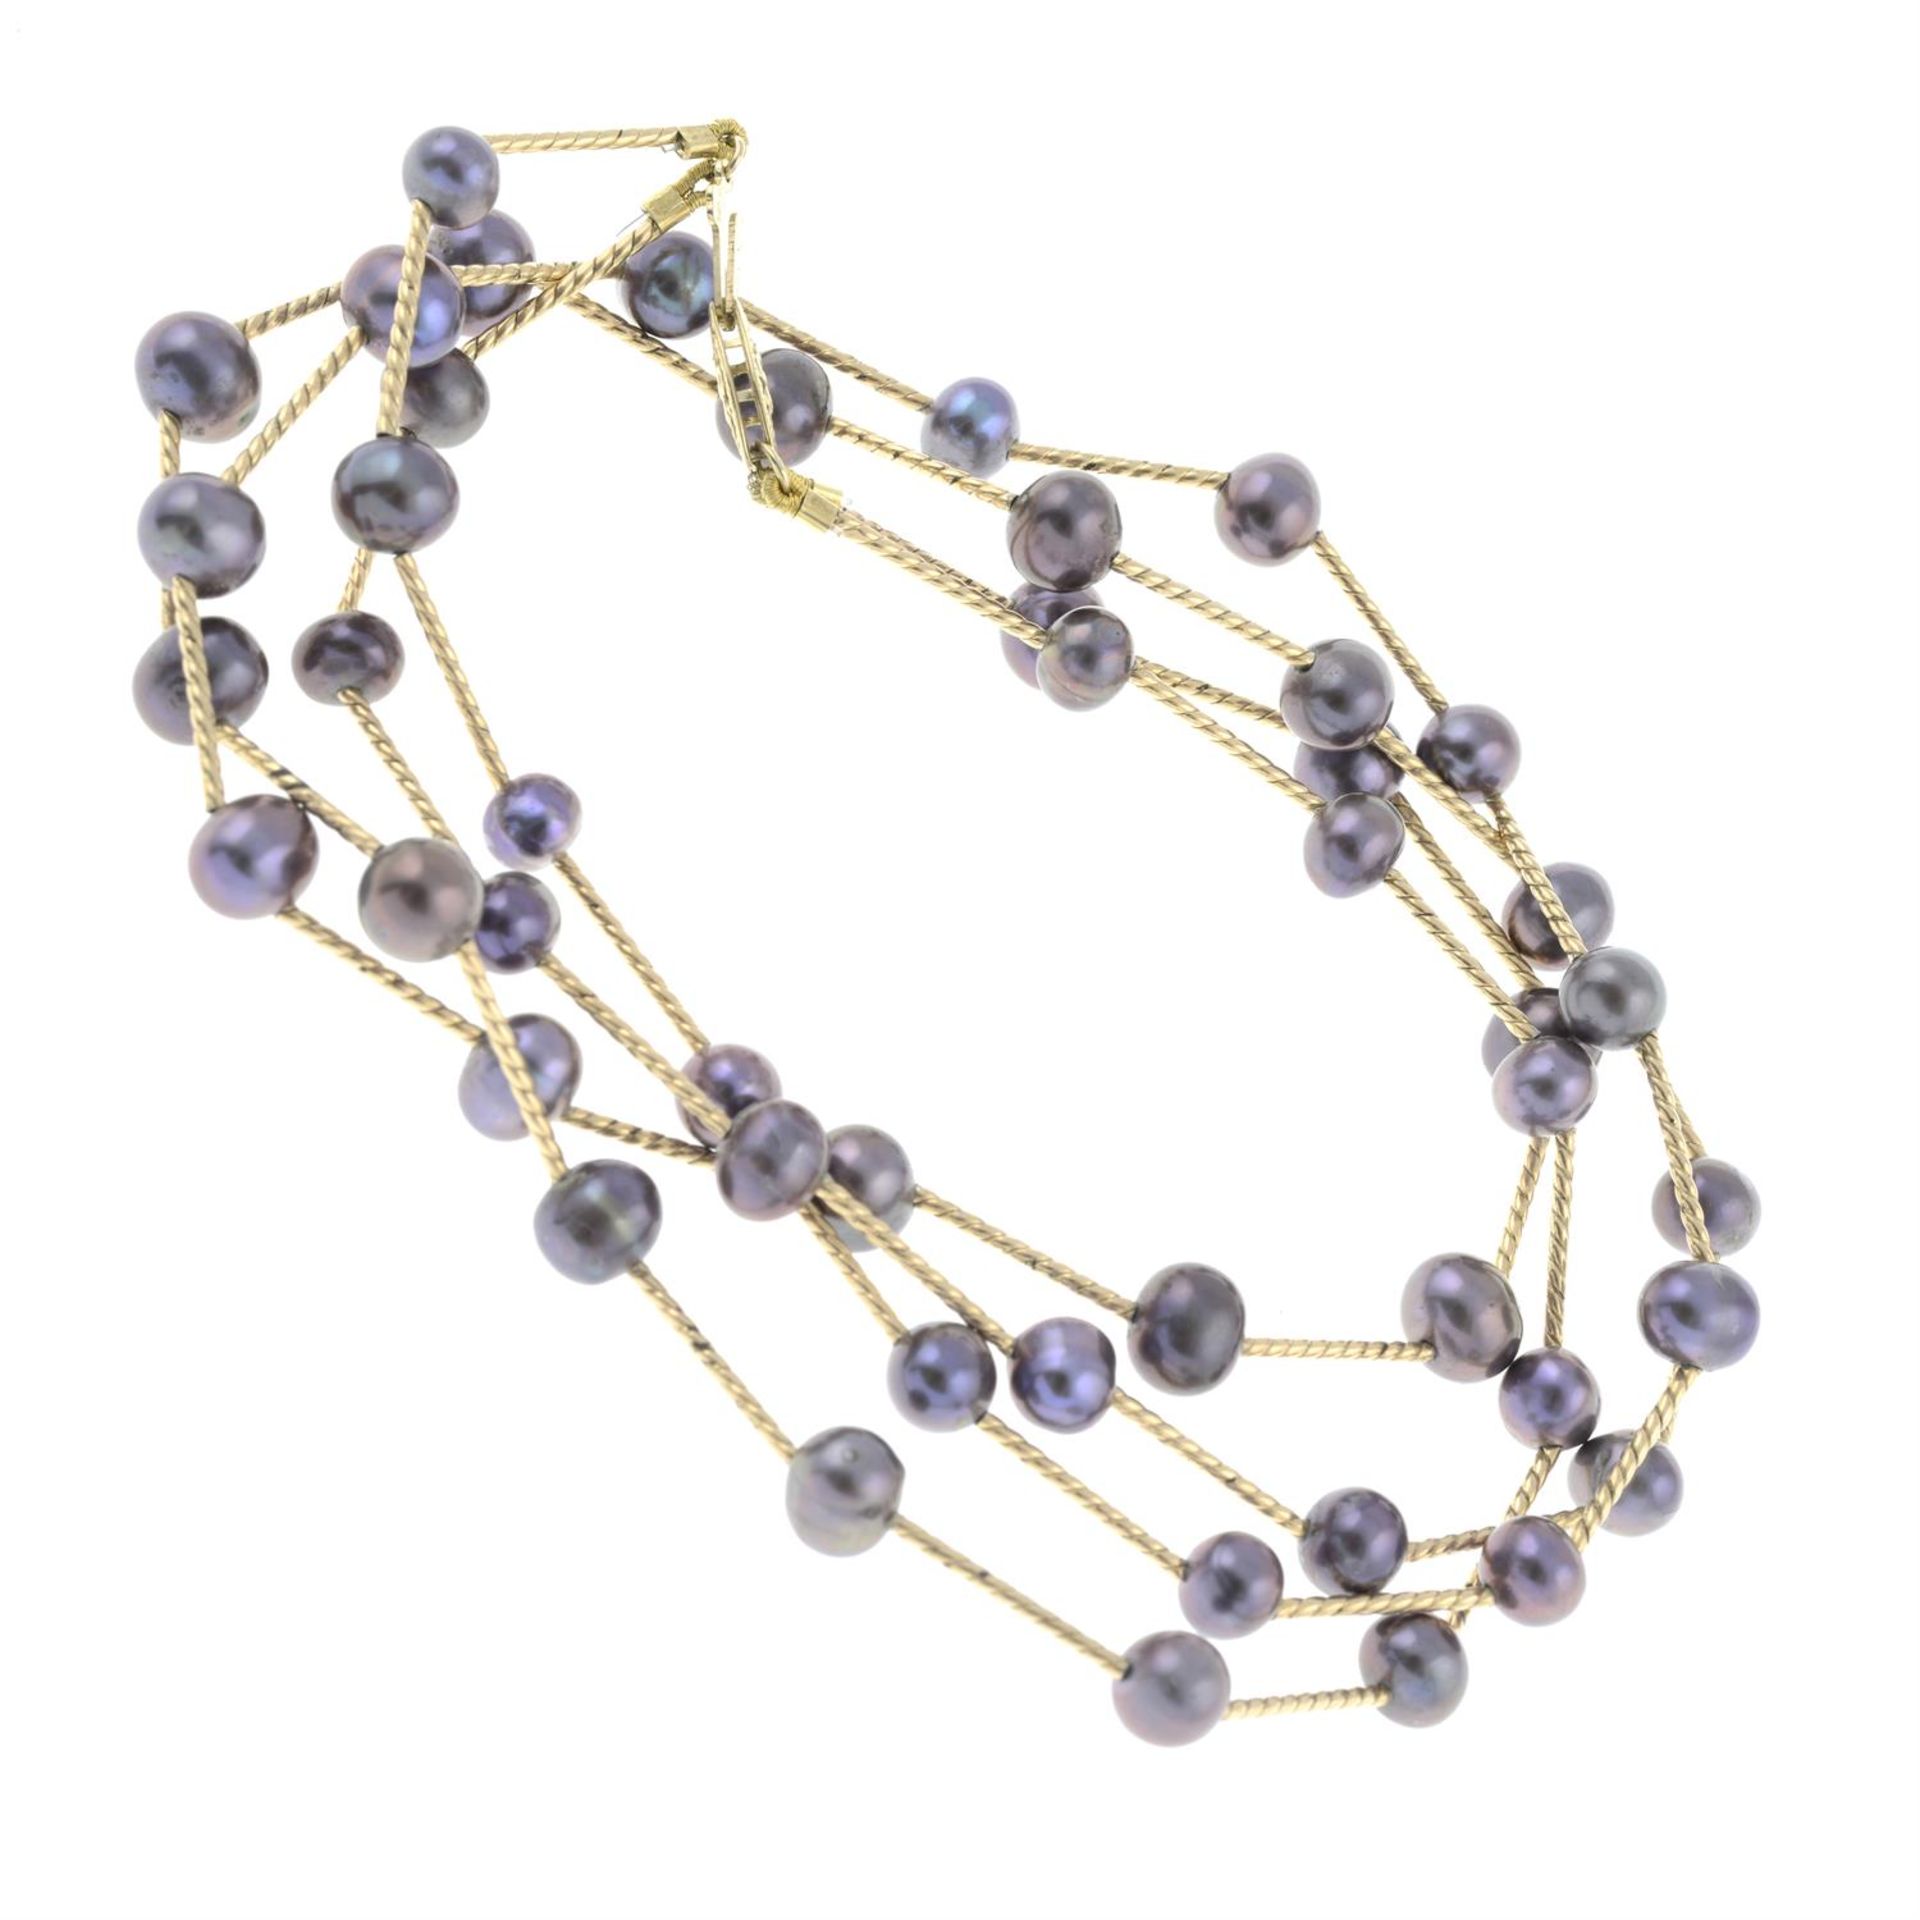 A cultured pearl necklace. - Image 2 of 2